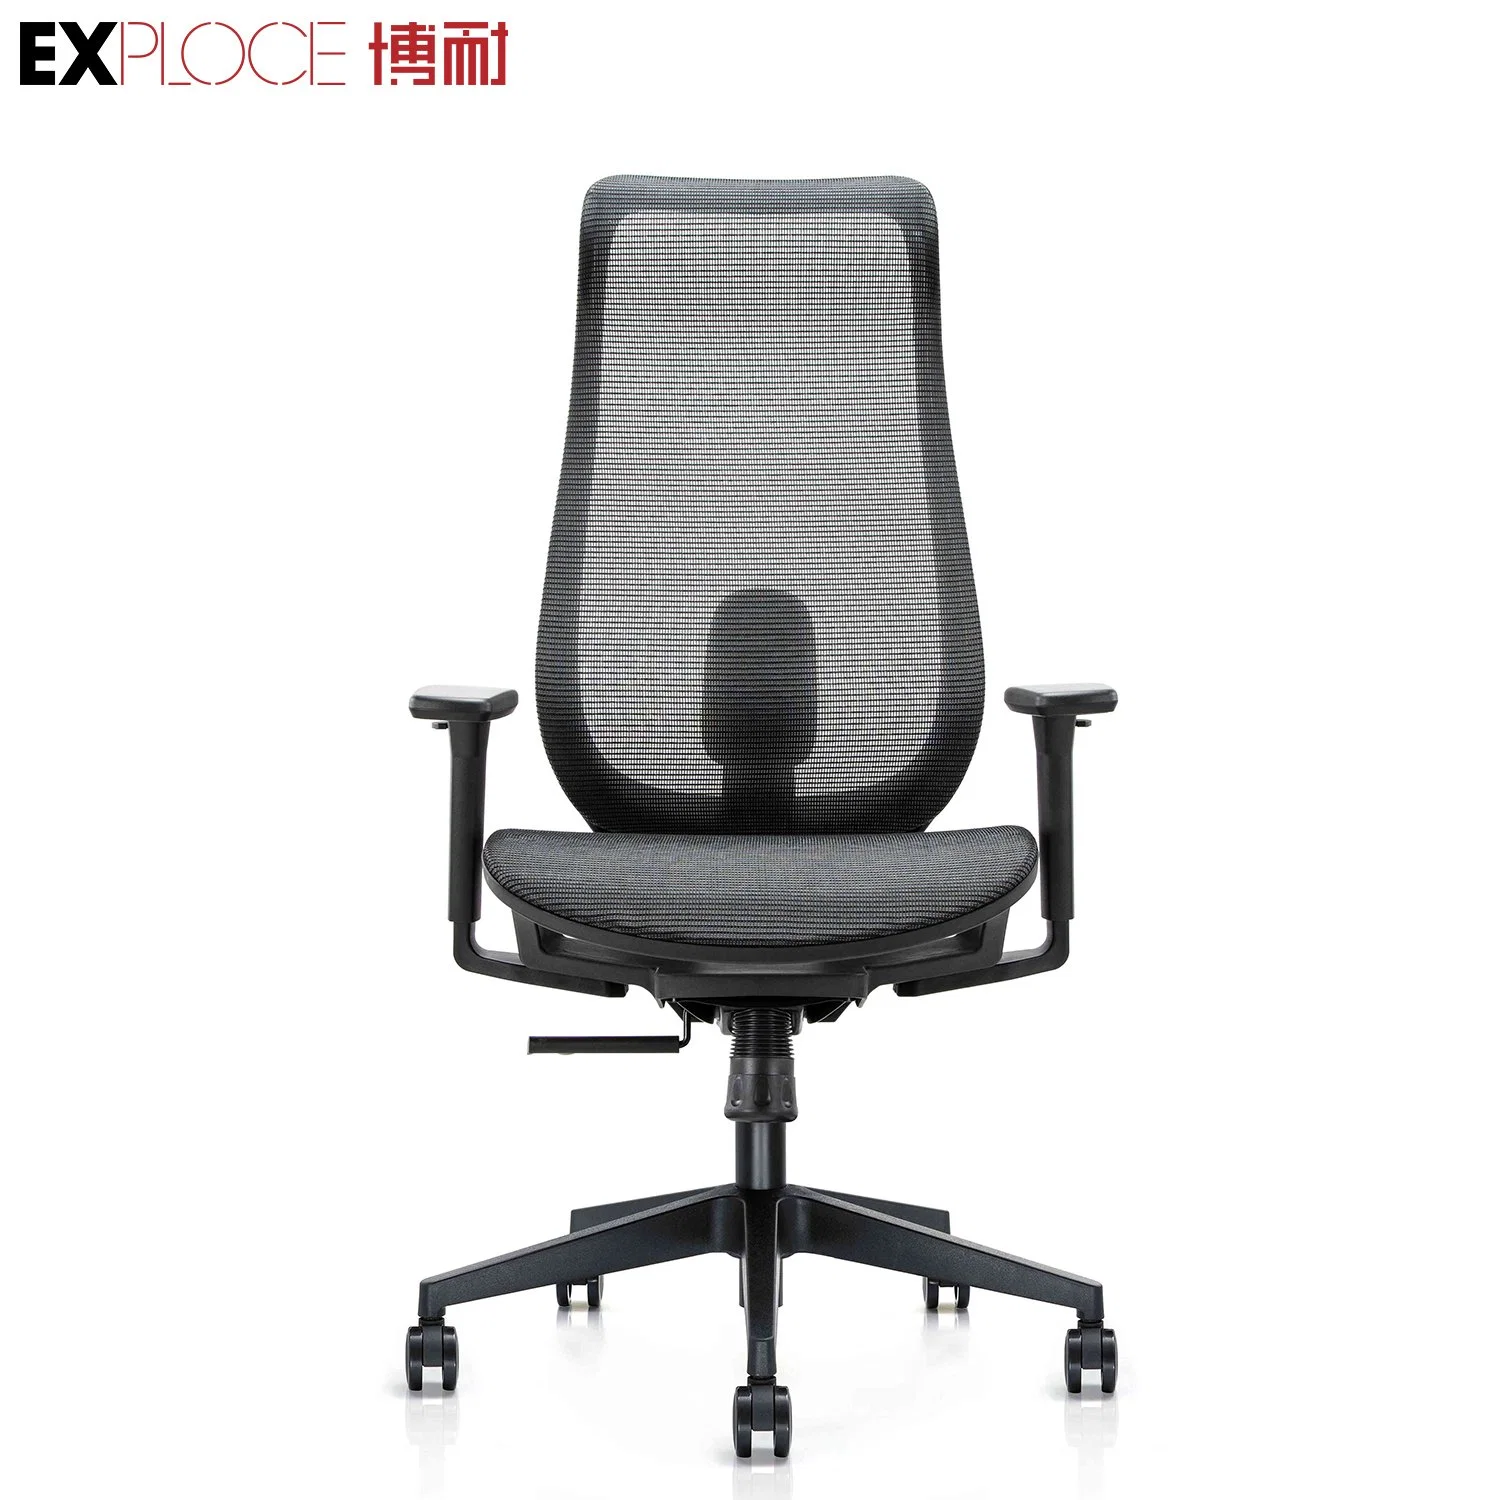 1 PCS for Min Order Approved BIFMA Gaming Chair Office Furniture